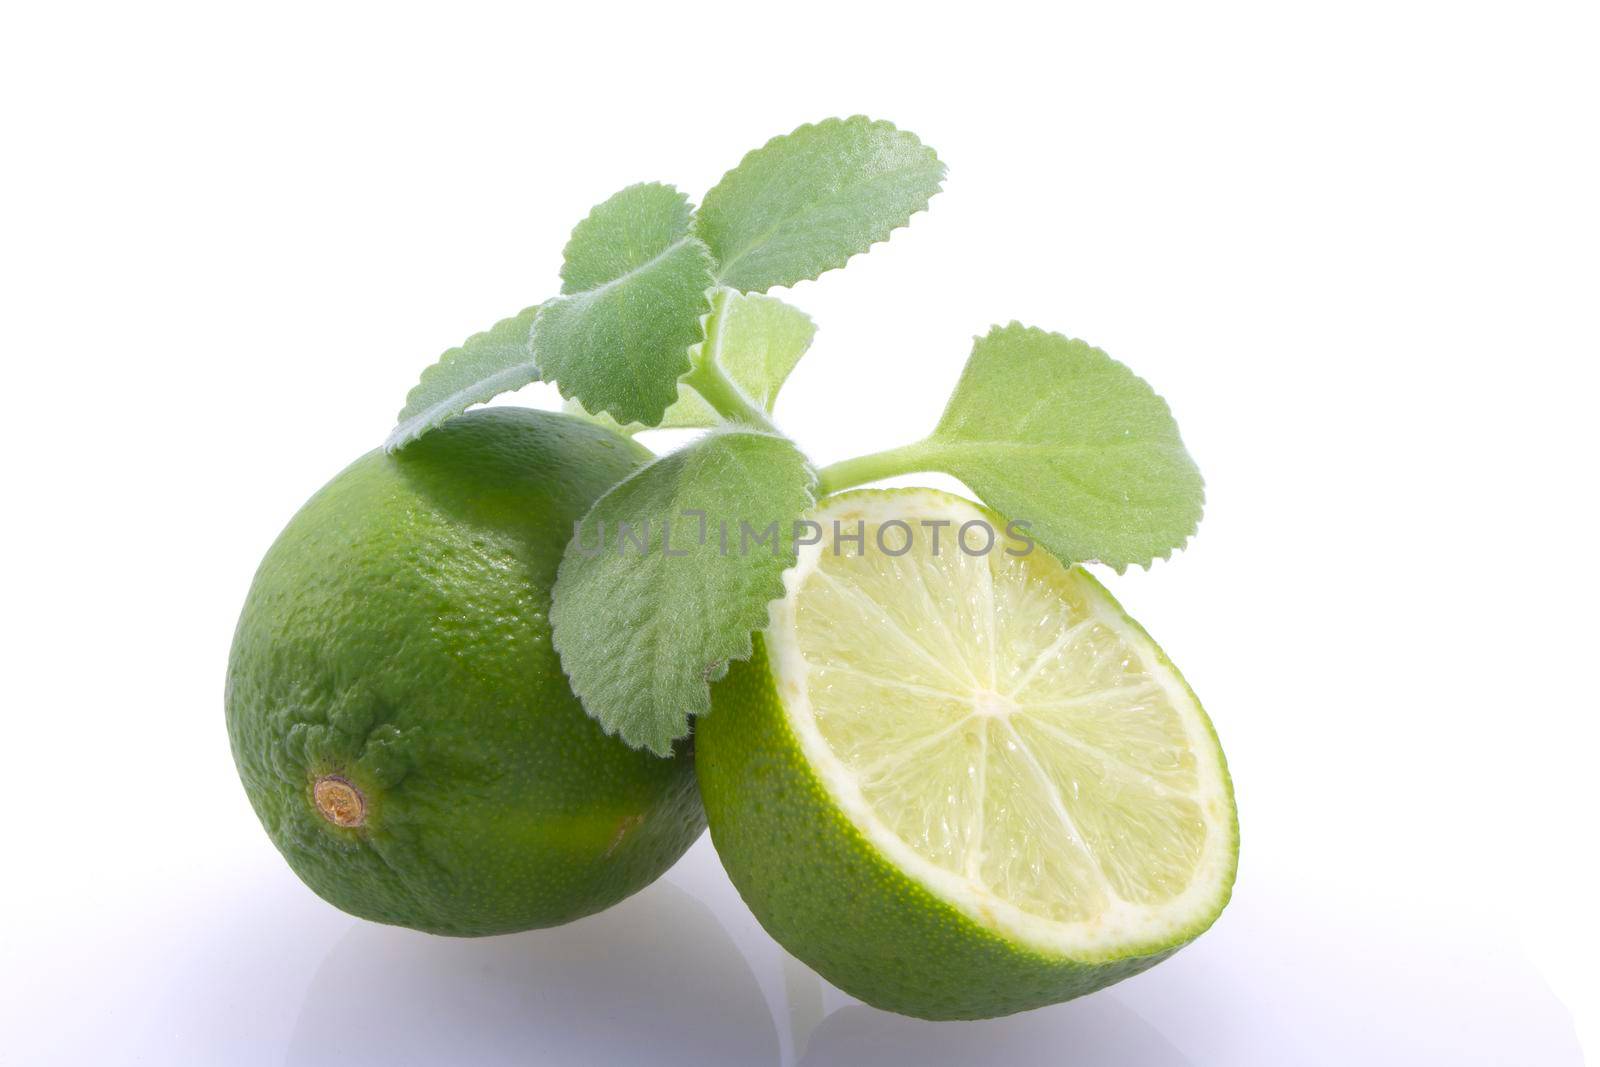 Fresh, natural, green limes, cut in half and whole, fresh mint on a white background.